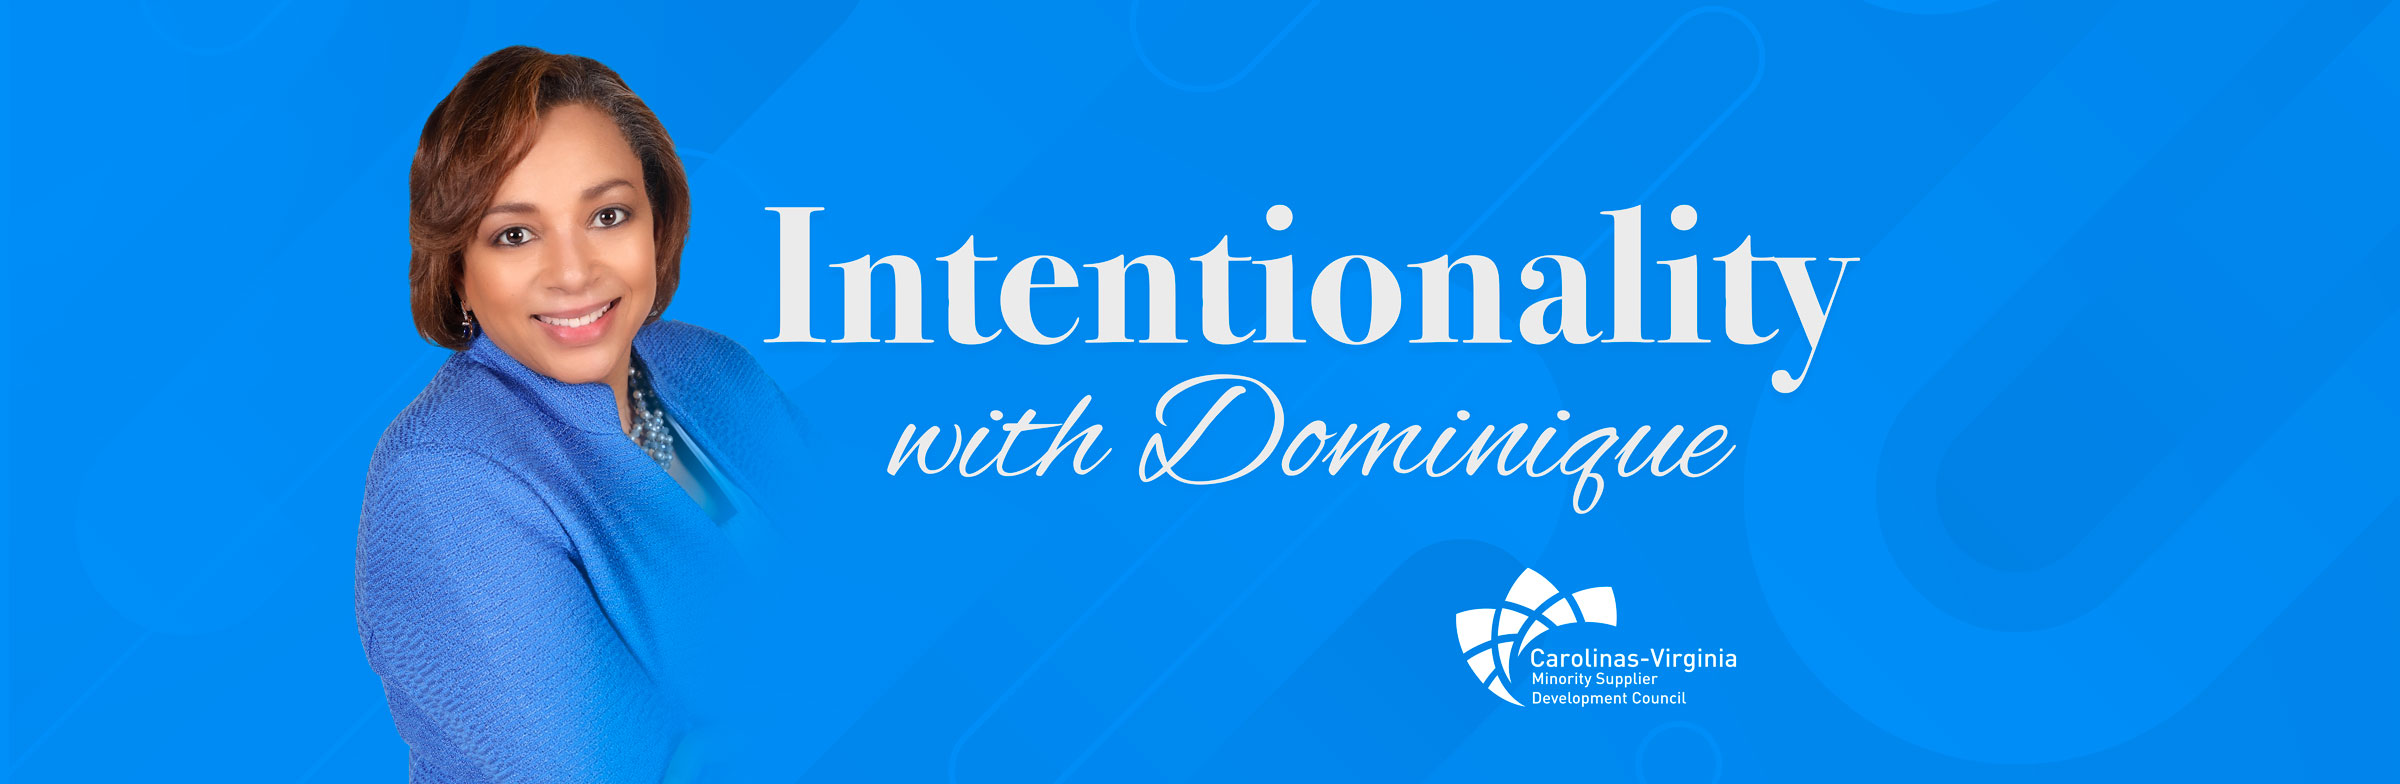 Intentionality with Dominique - CVMSDC